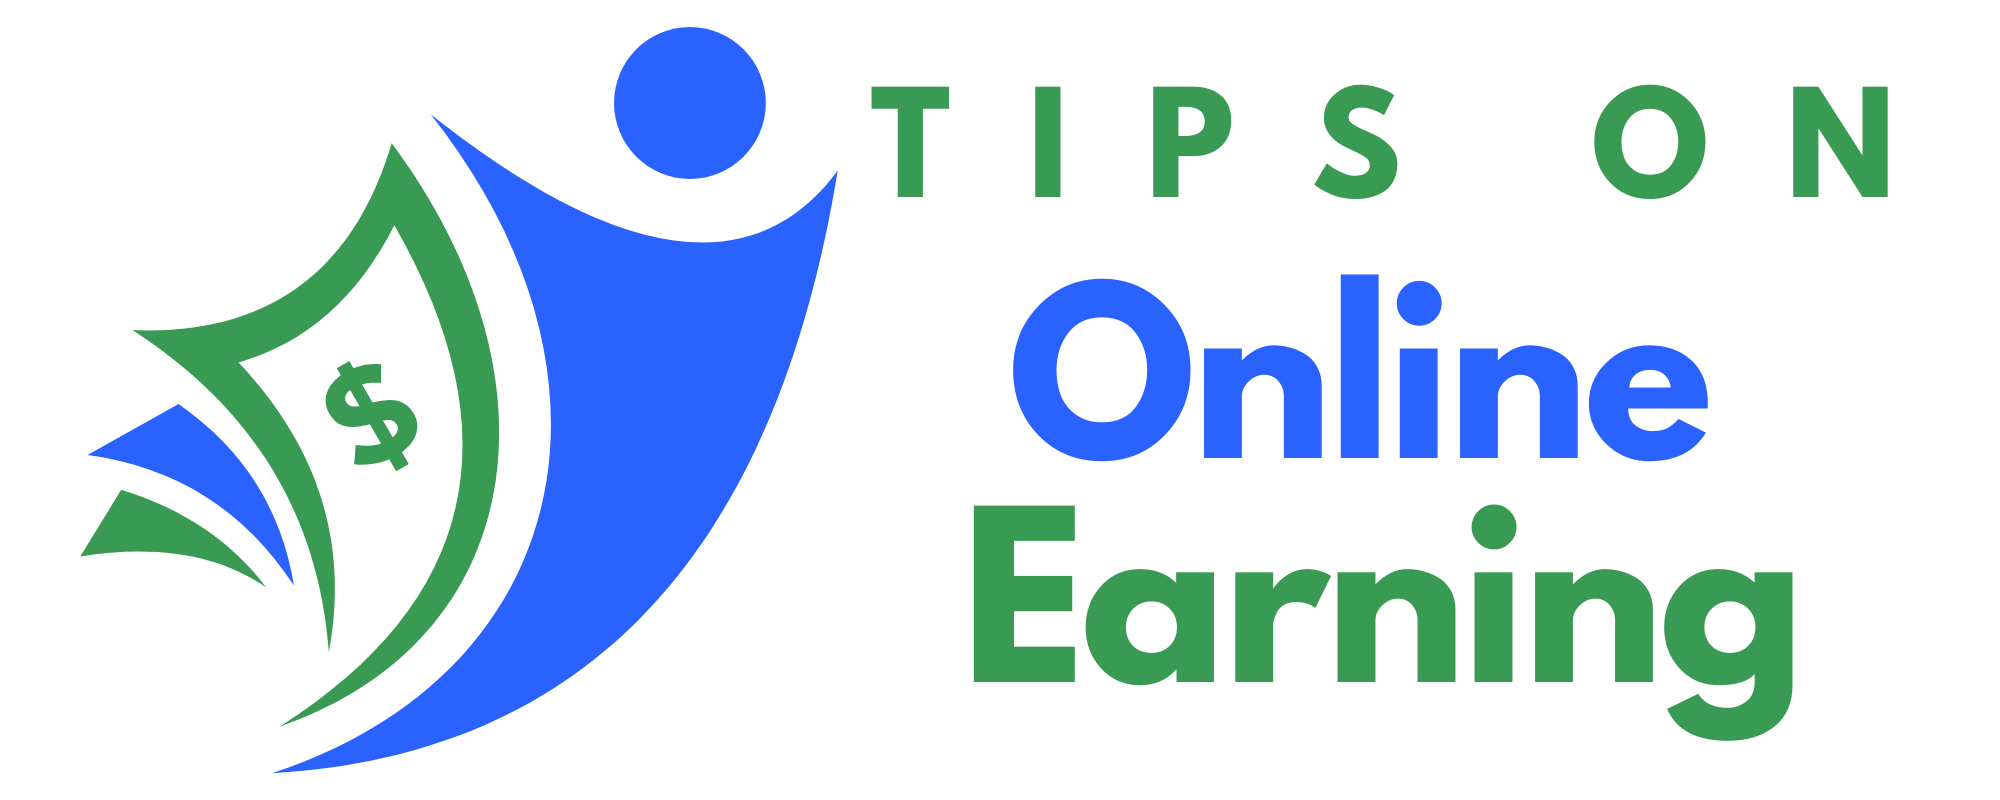 Tips on Online Learning